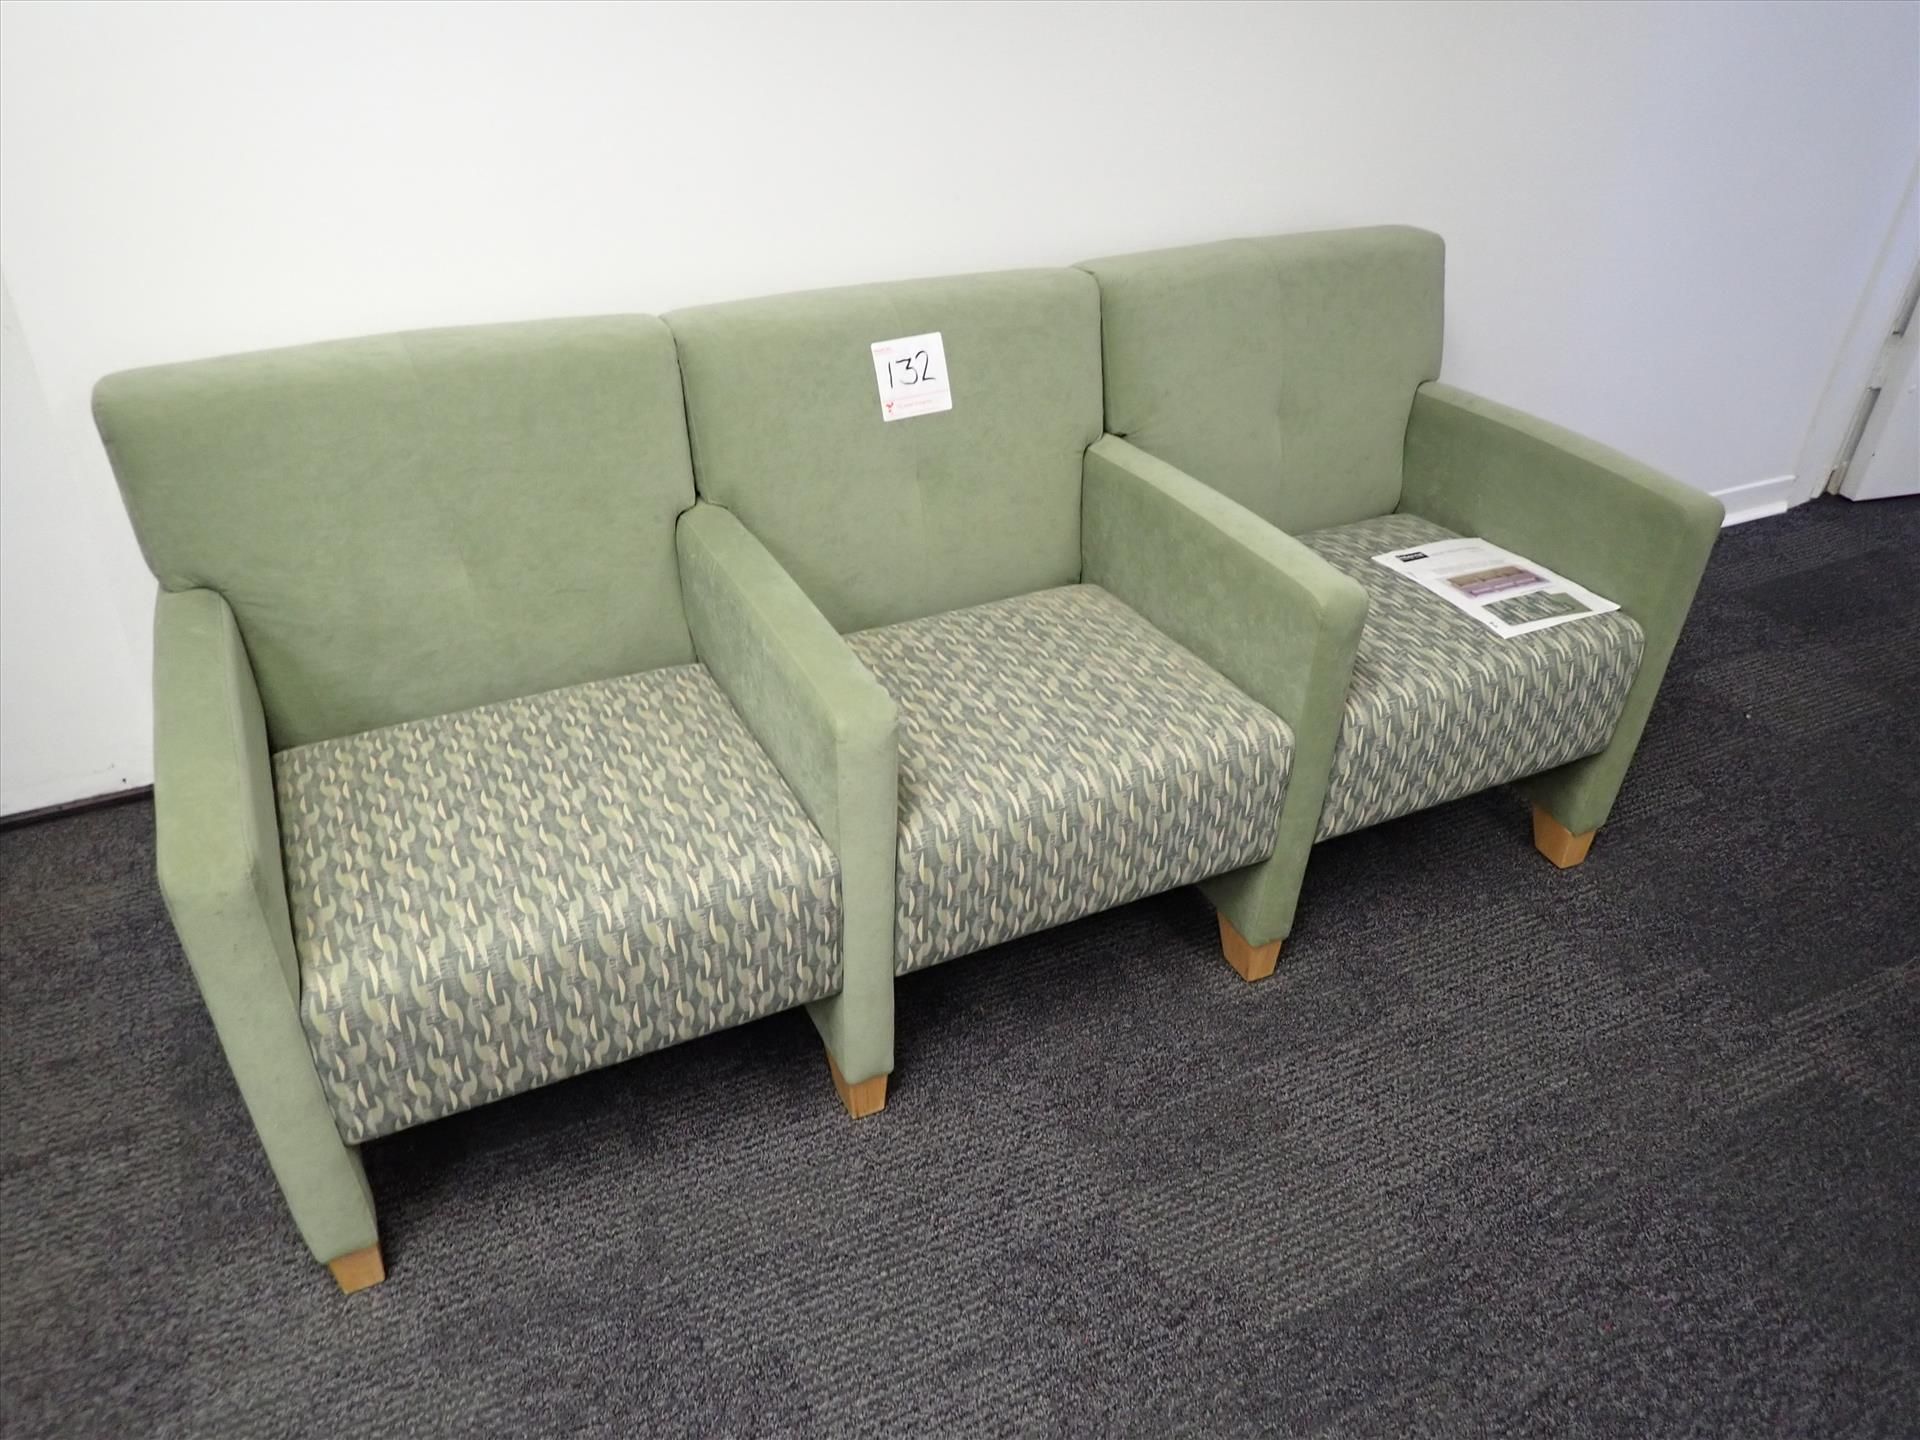 Demi ganged lounge seating, 3-seats, stain-resistant commercial-grade fabrics